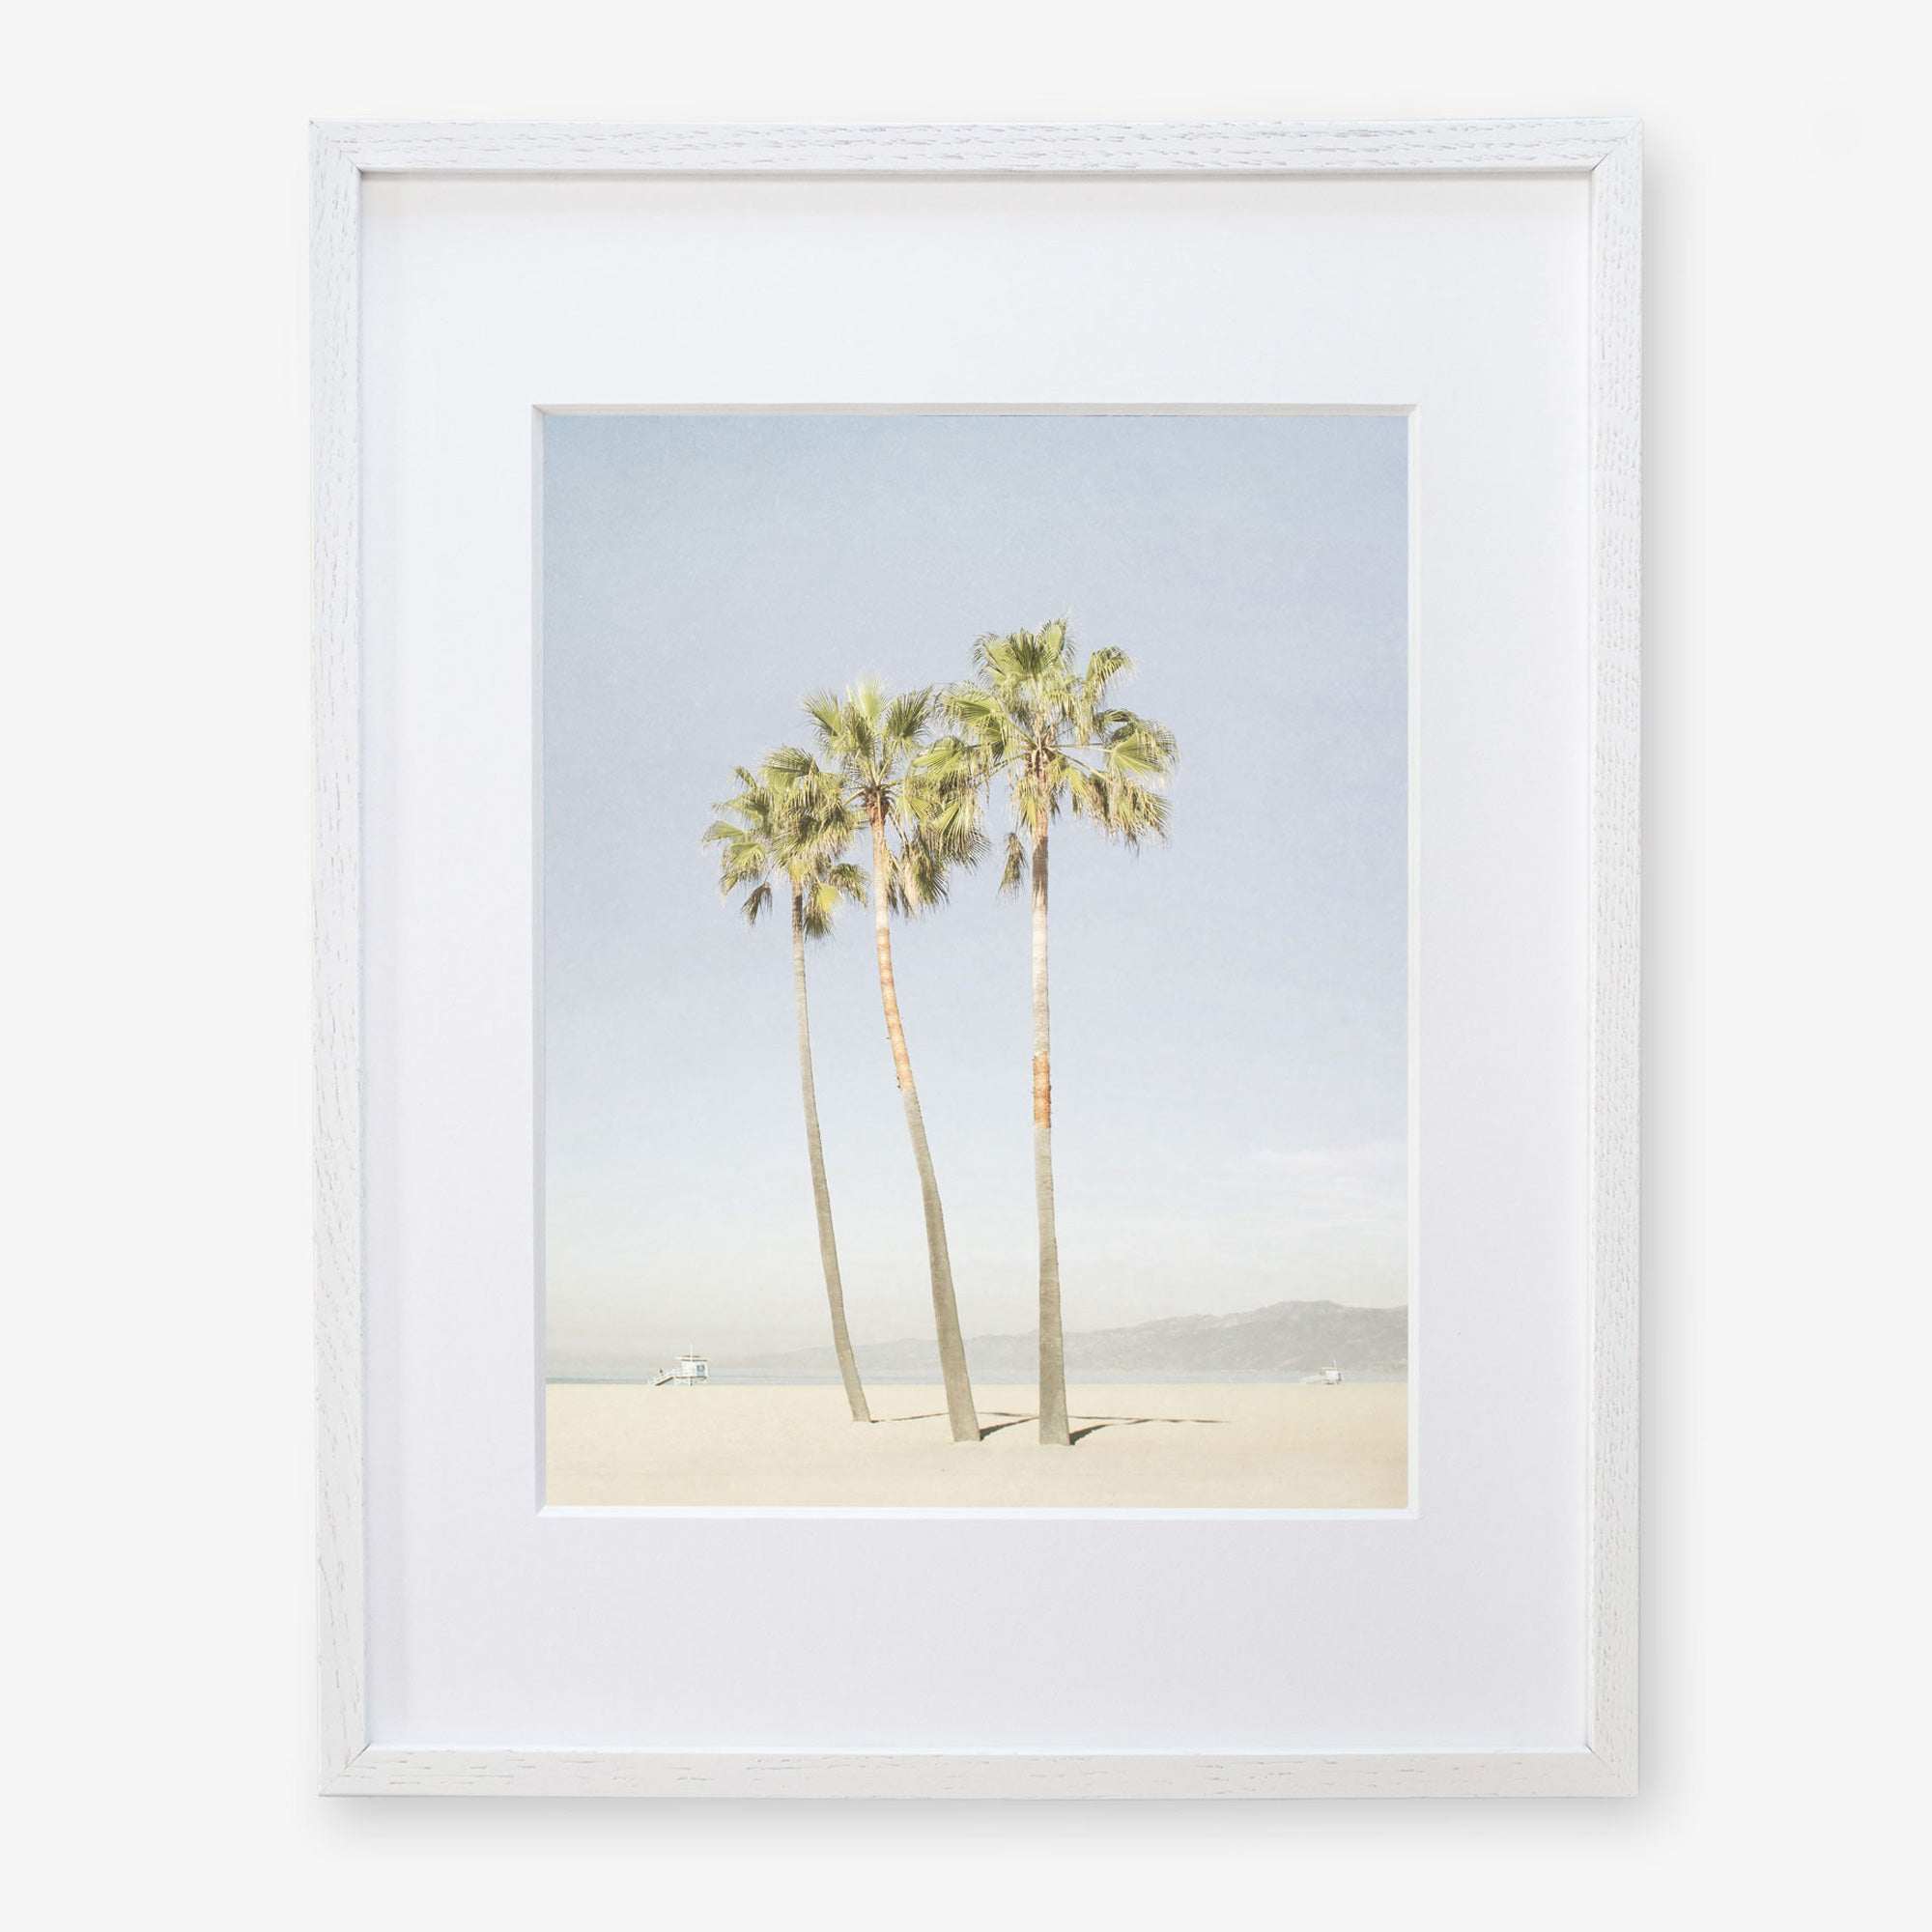 A framed photograph of three tall palm trees under a clear sky, taken at Venice Beach, with a sandy beach and distant hills visible at the base of the palms - Offley Green California Venice Beach Print, &#39;Three Palms&#39;.